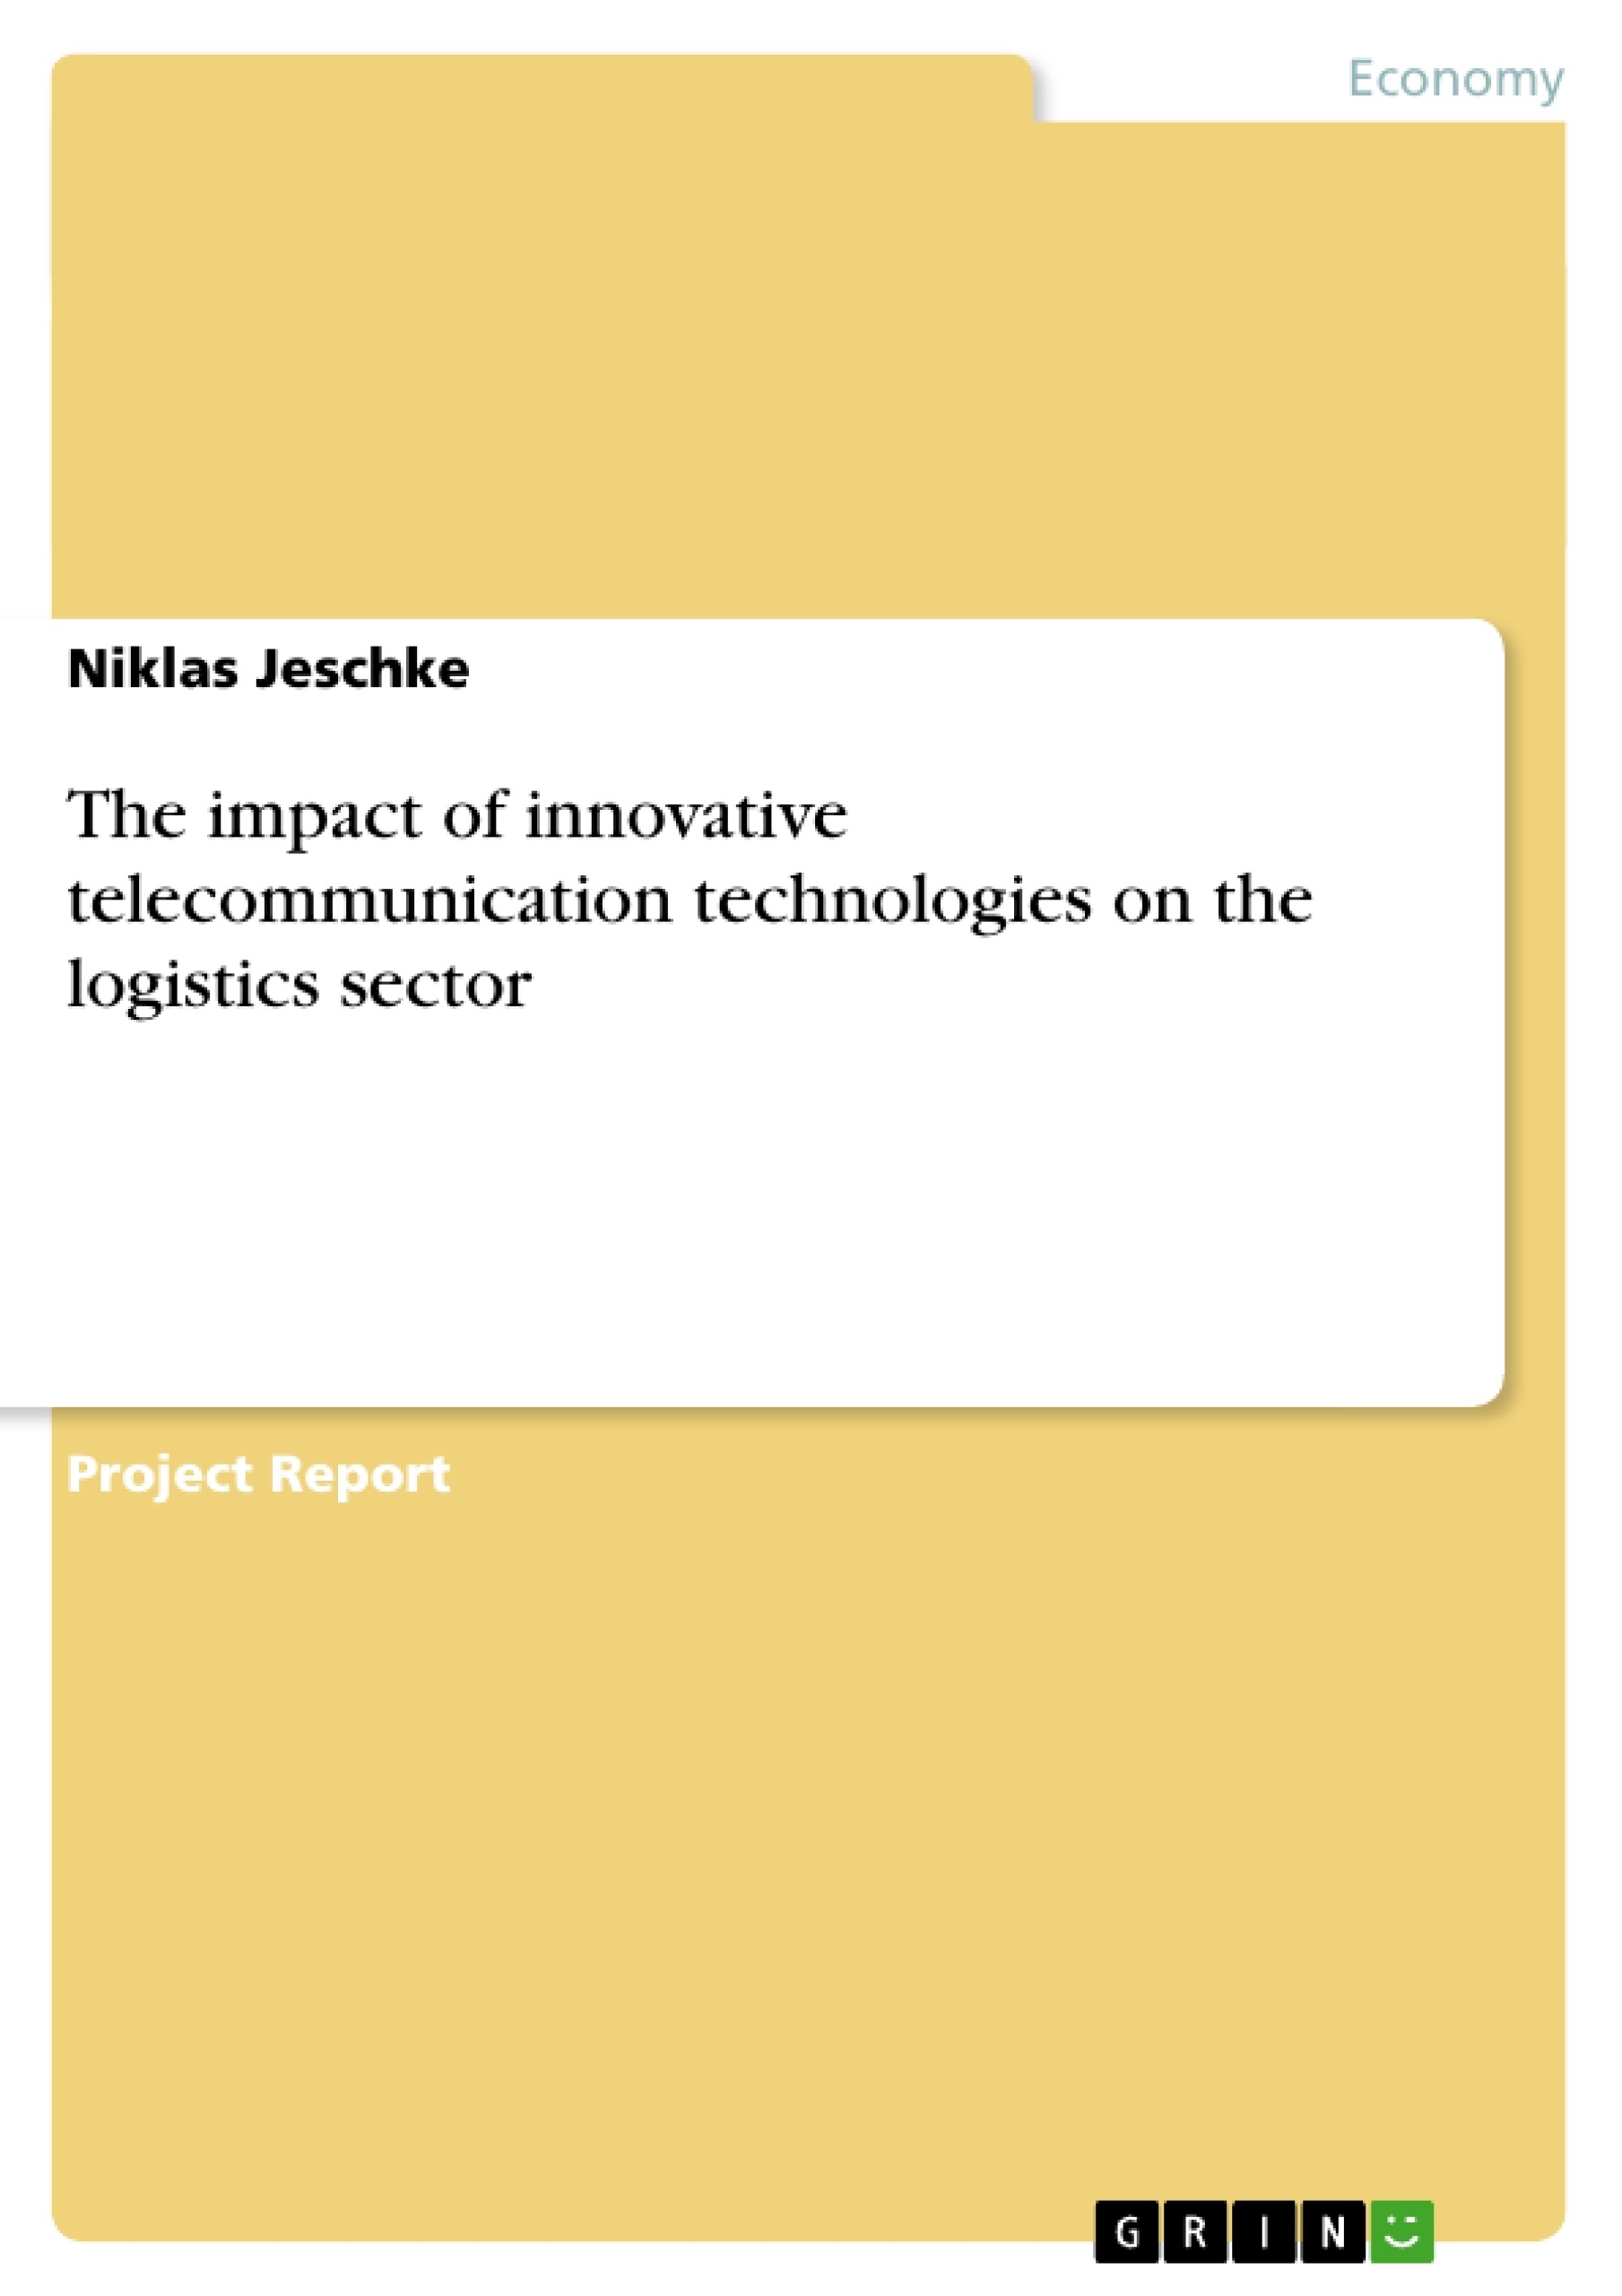 Title: The impact of innovative telecommunication technologies on the logistics sector